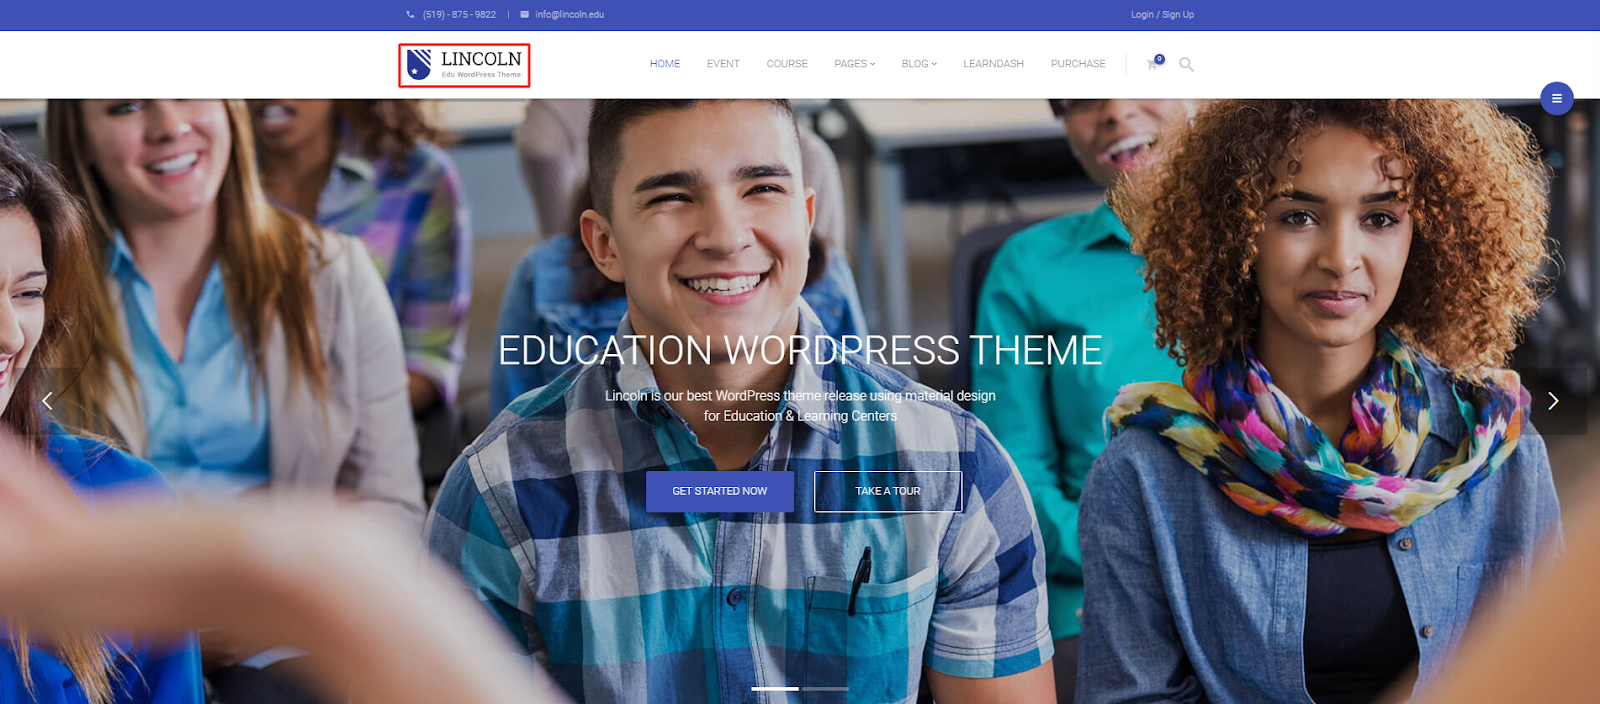 Lincoln - WordPress Education Theme with Material Design 